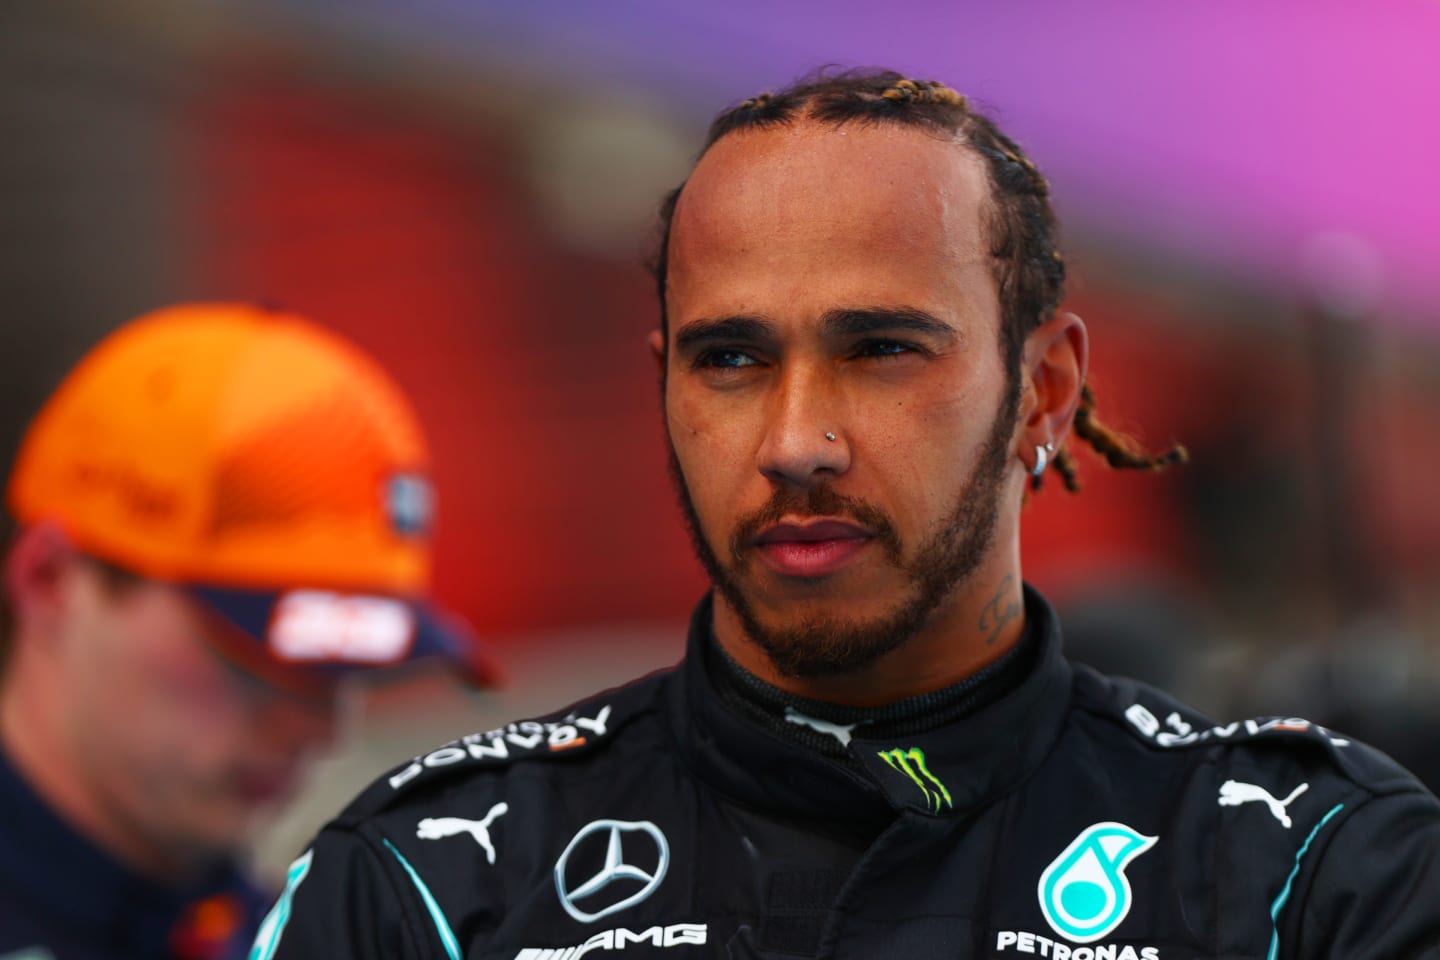 BARCELONA, SPAIN - MAY 09:  Lewis Hamilton of Great Britain  Mercedes AMG Petronas looks on in parc